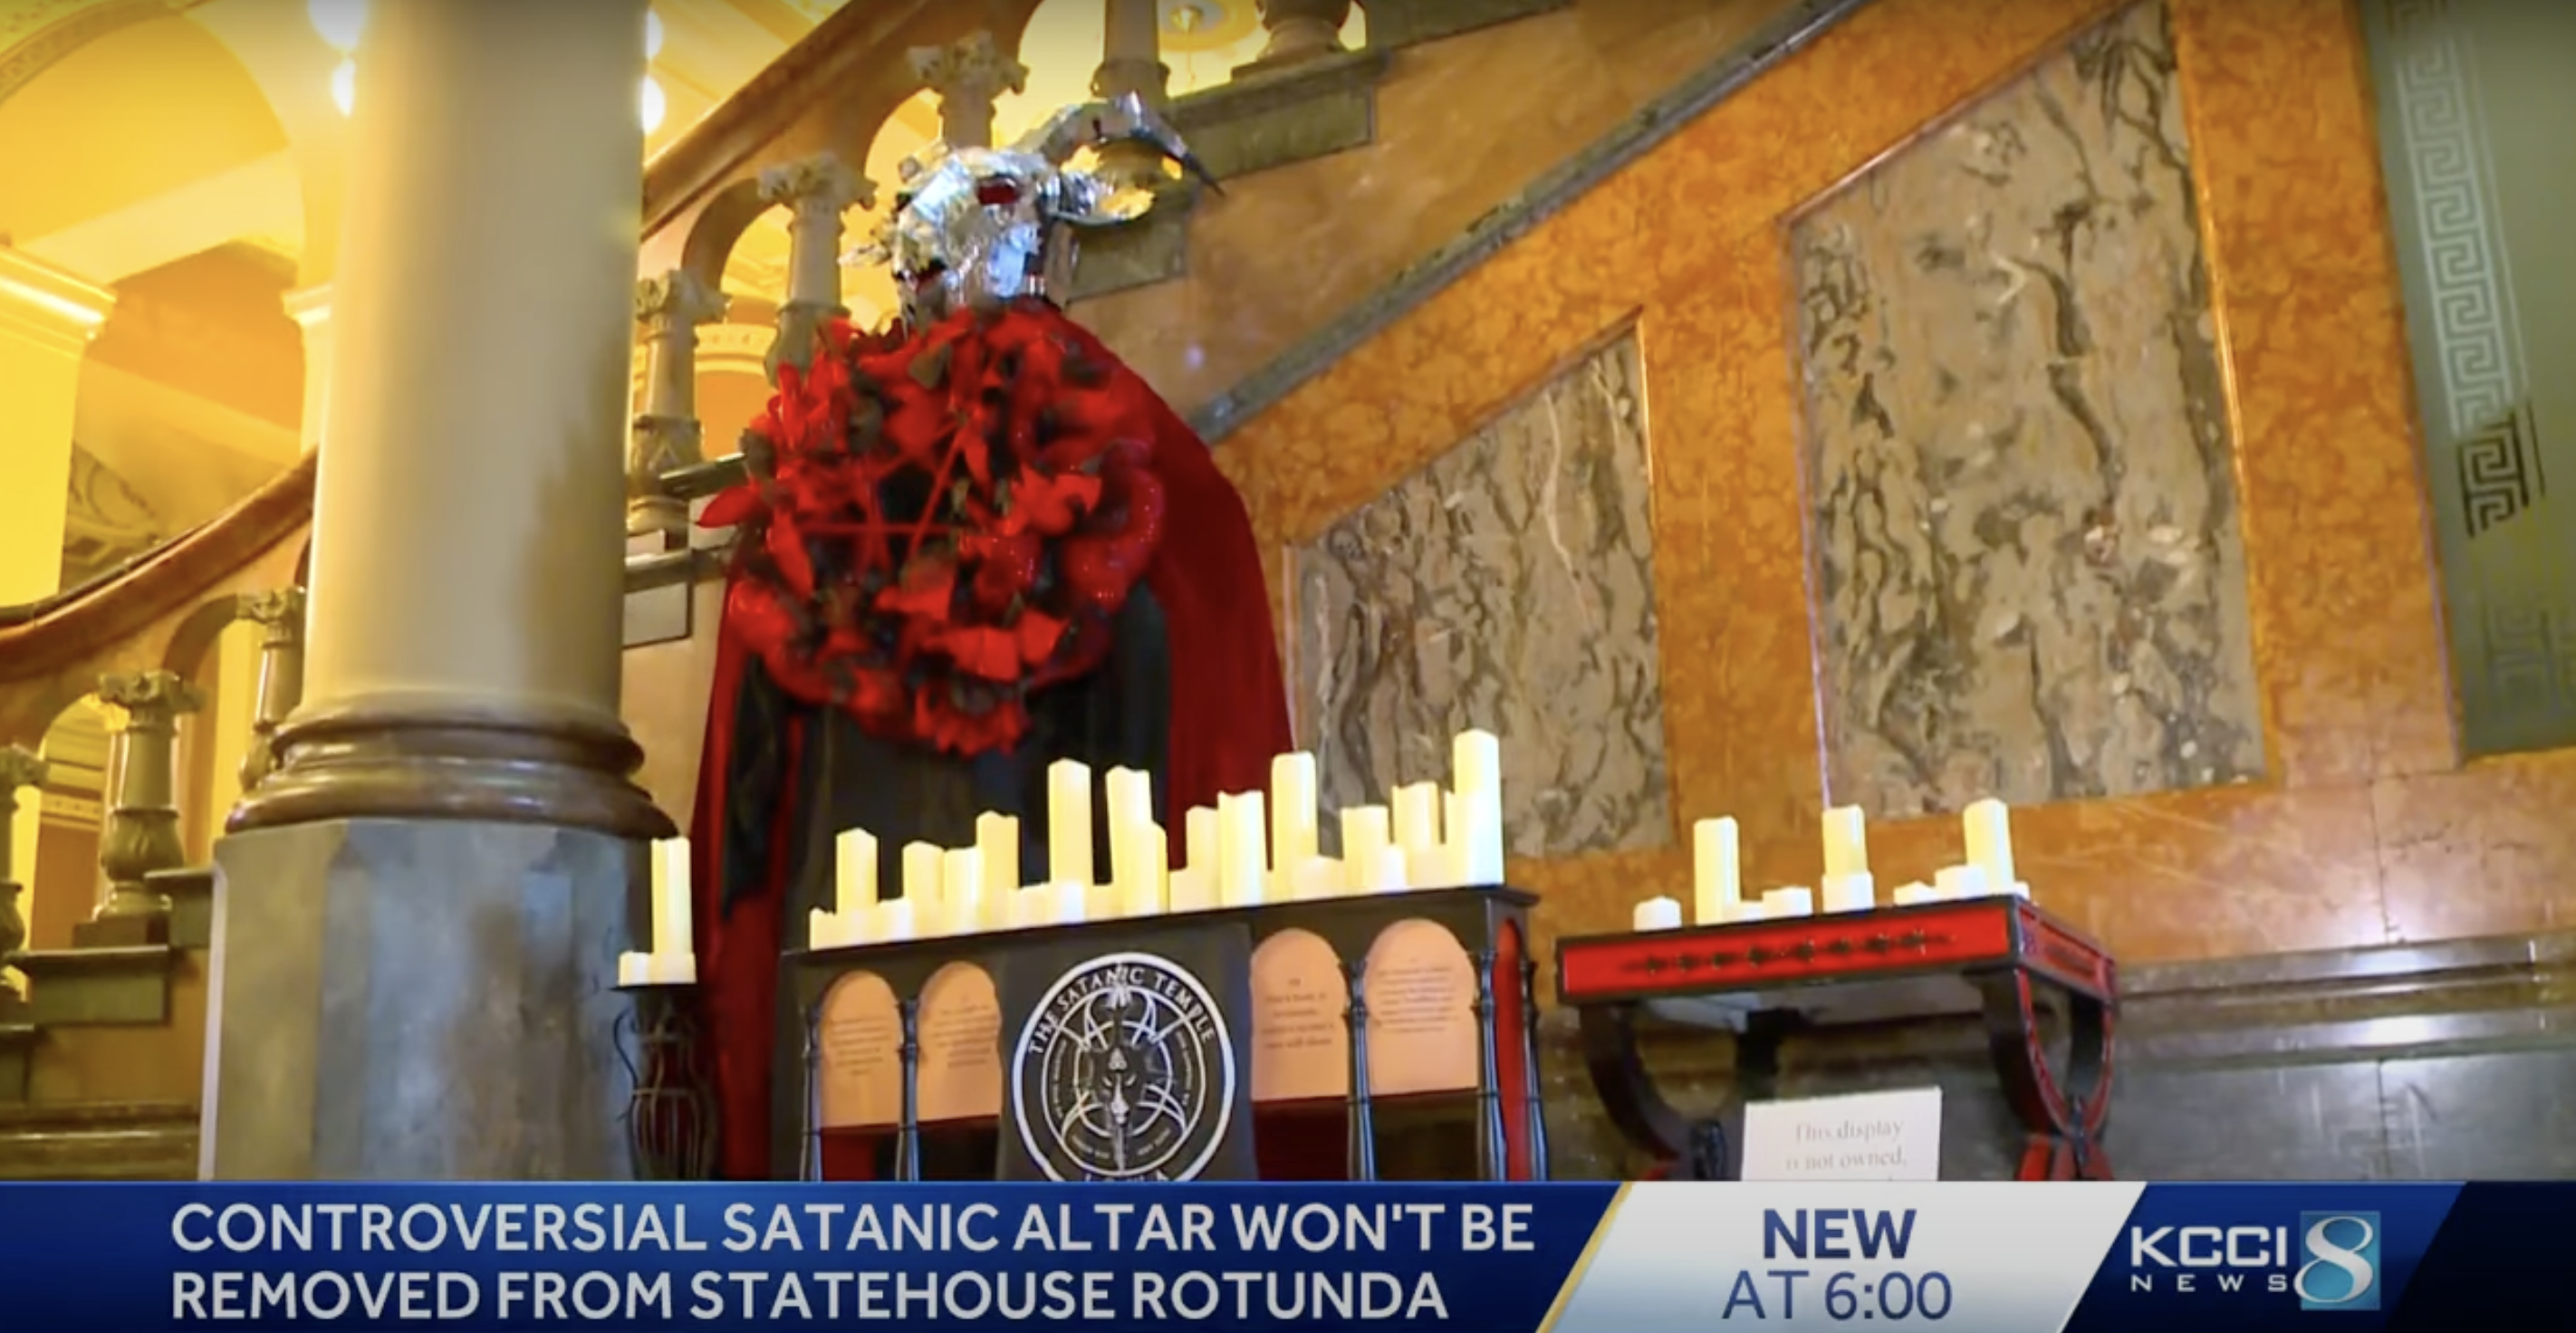 News footage of the altar